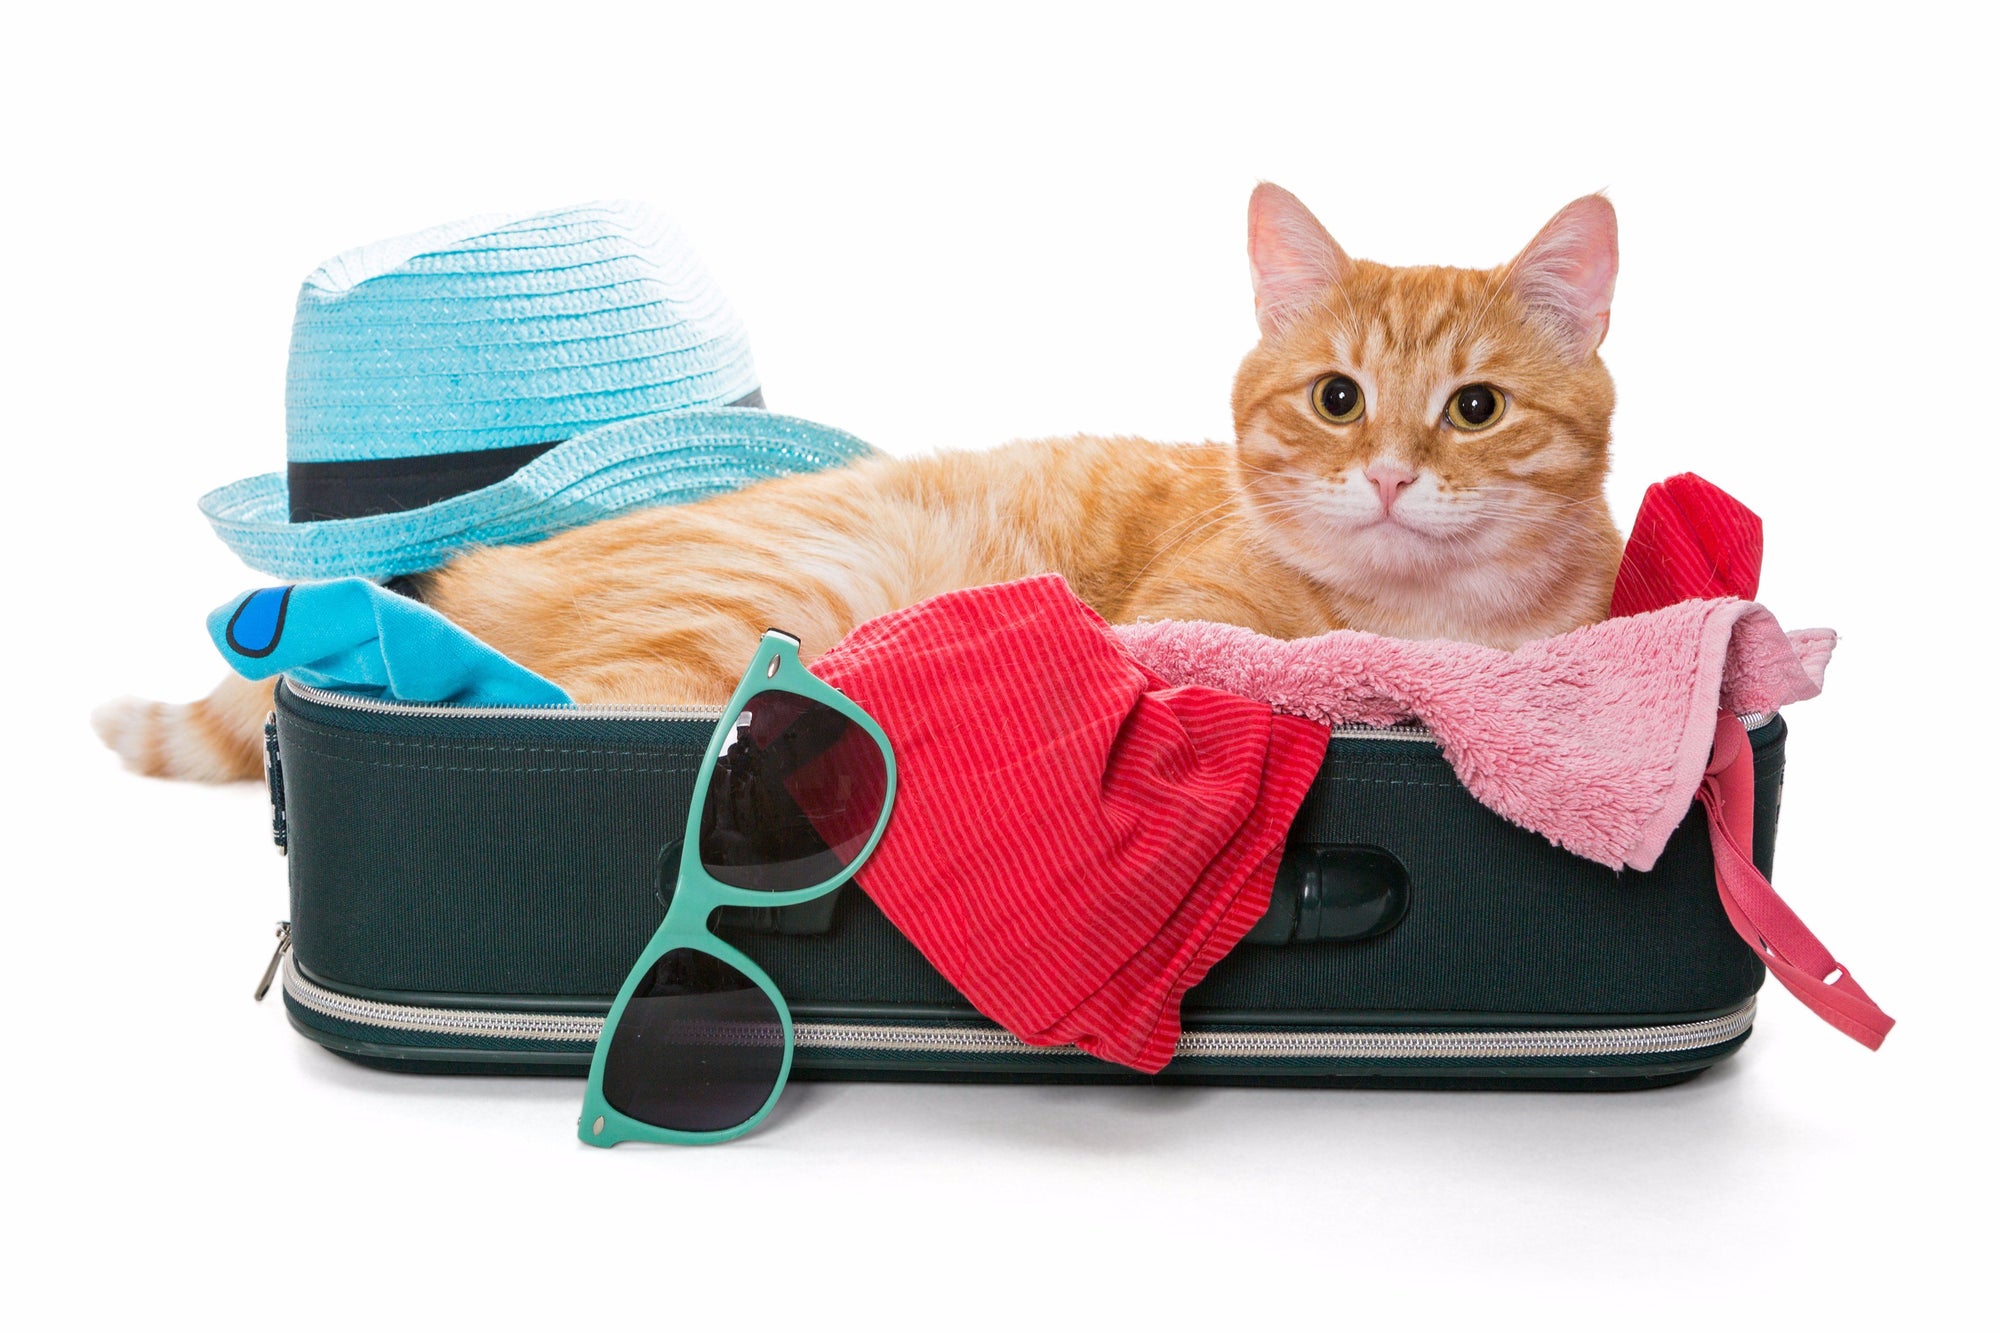 Making Travel Easy on Your Cat This Holiday Season